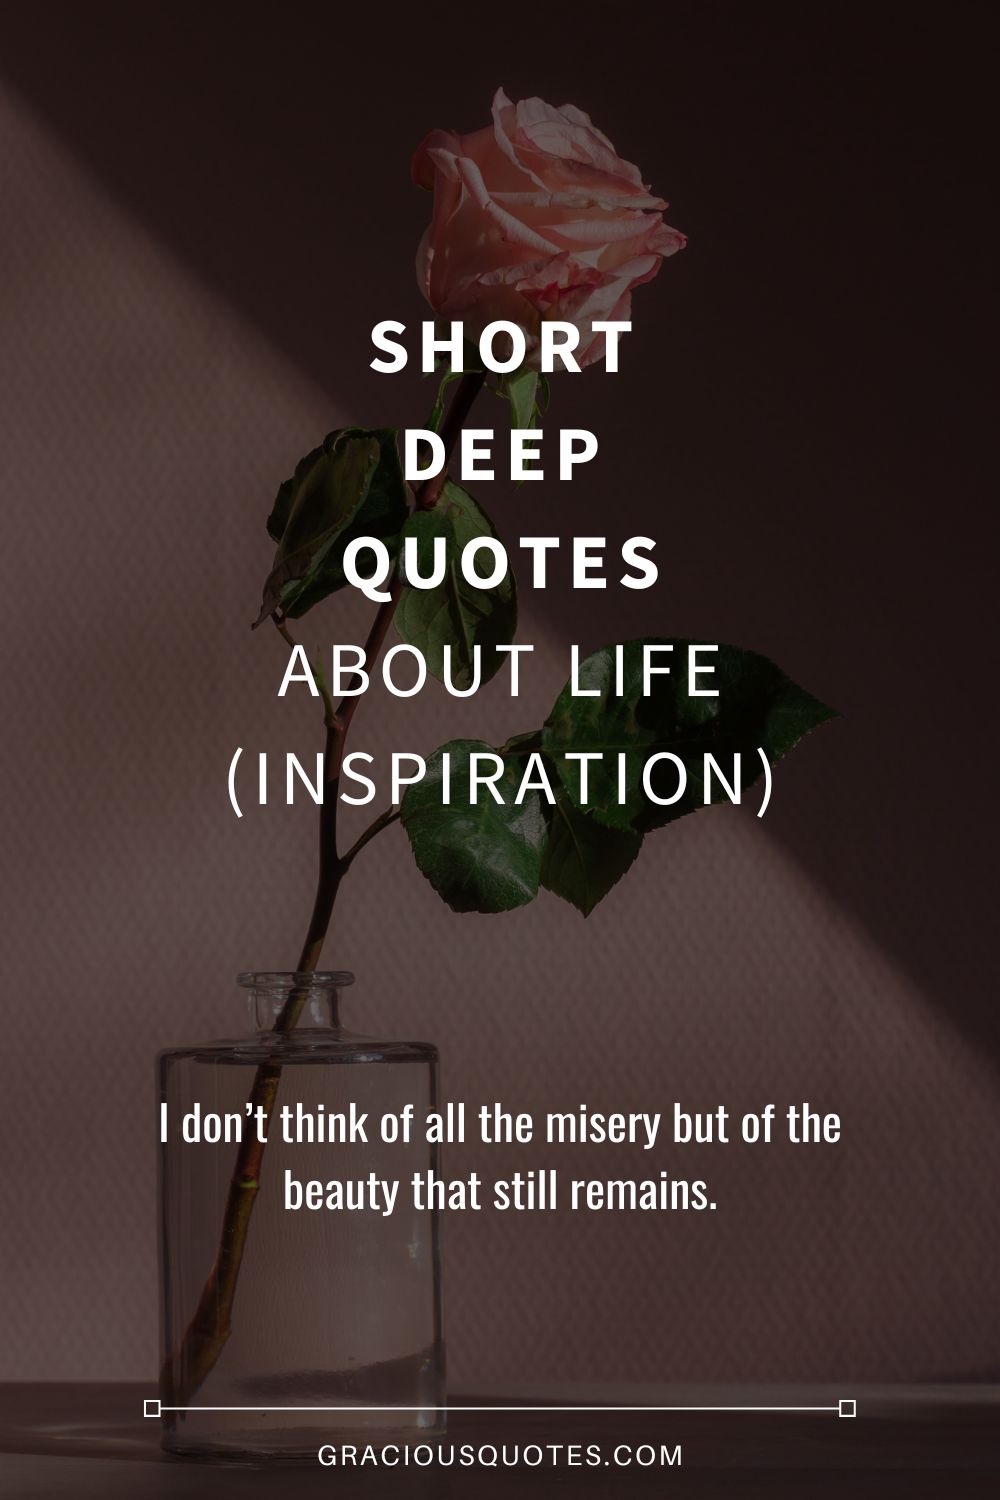 82 Short Deep Quotes About Life (INSPIRATION)